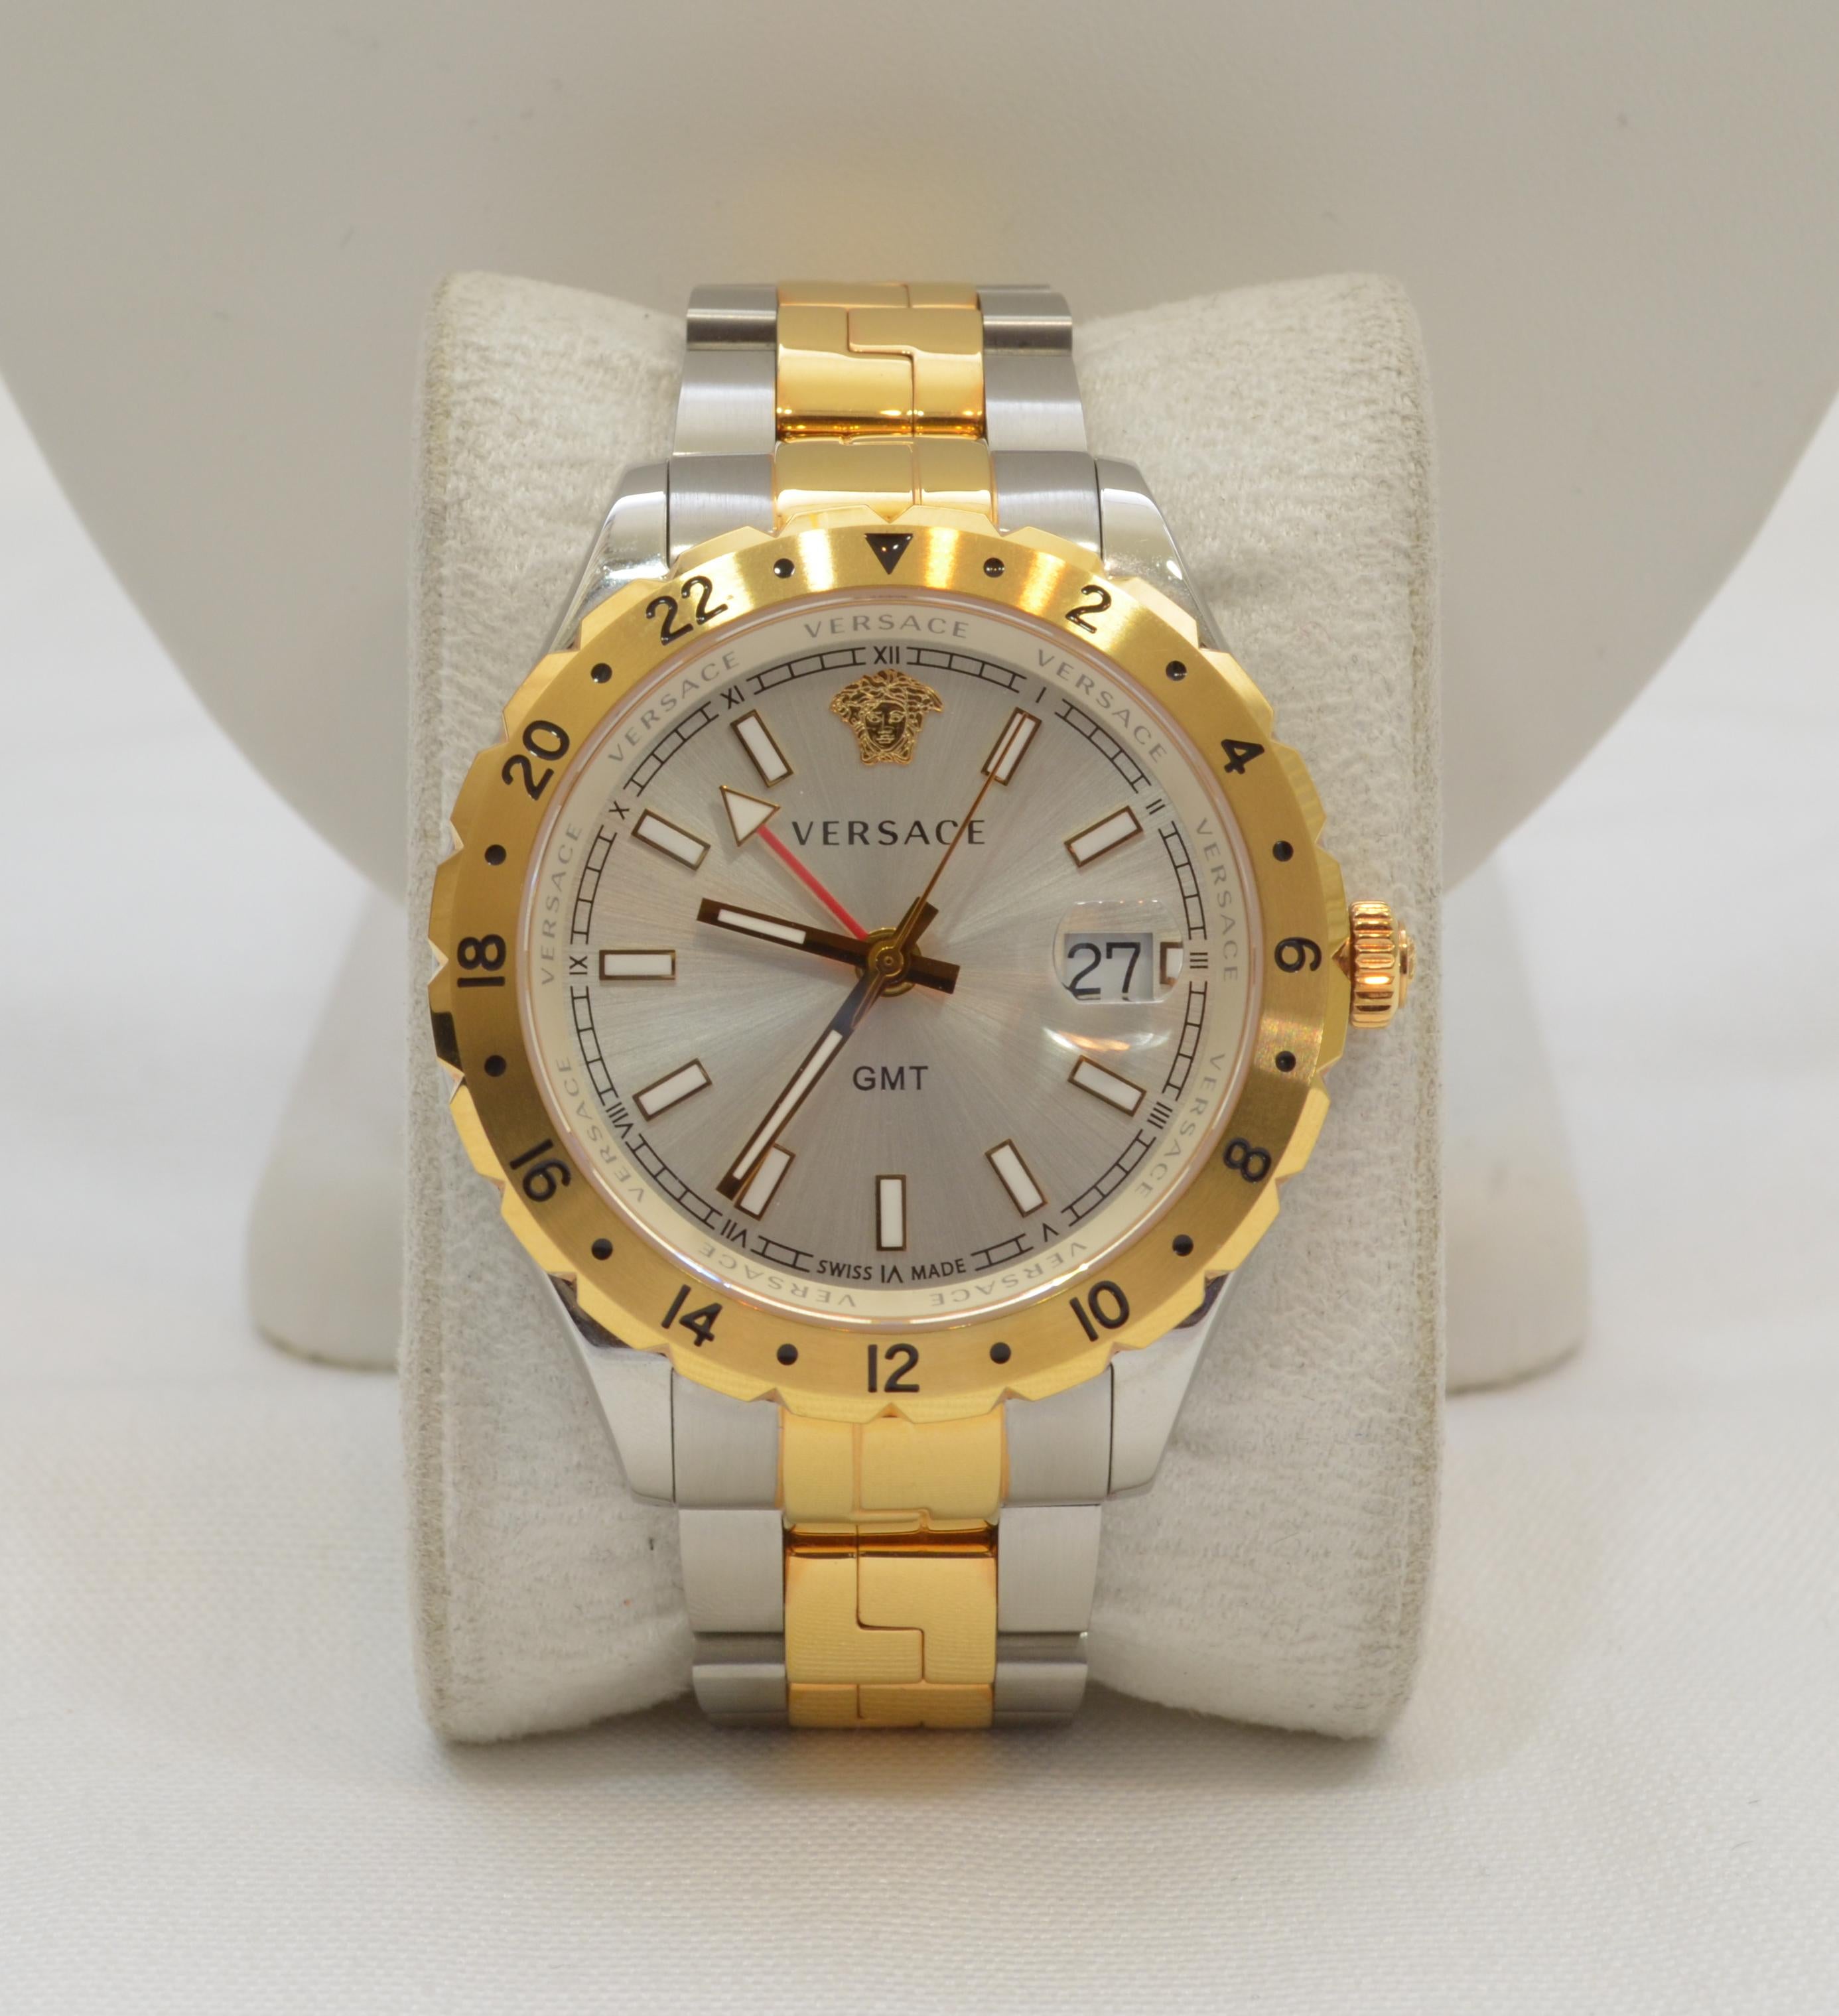 This 42 mm stainless steel timepiece by Versace features a refined and extremely readable dial including luminous hands and hour markers. Circling the sunray dial are clearly marked 24 hour indications. Encased in a two tone case this watch is